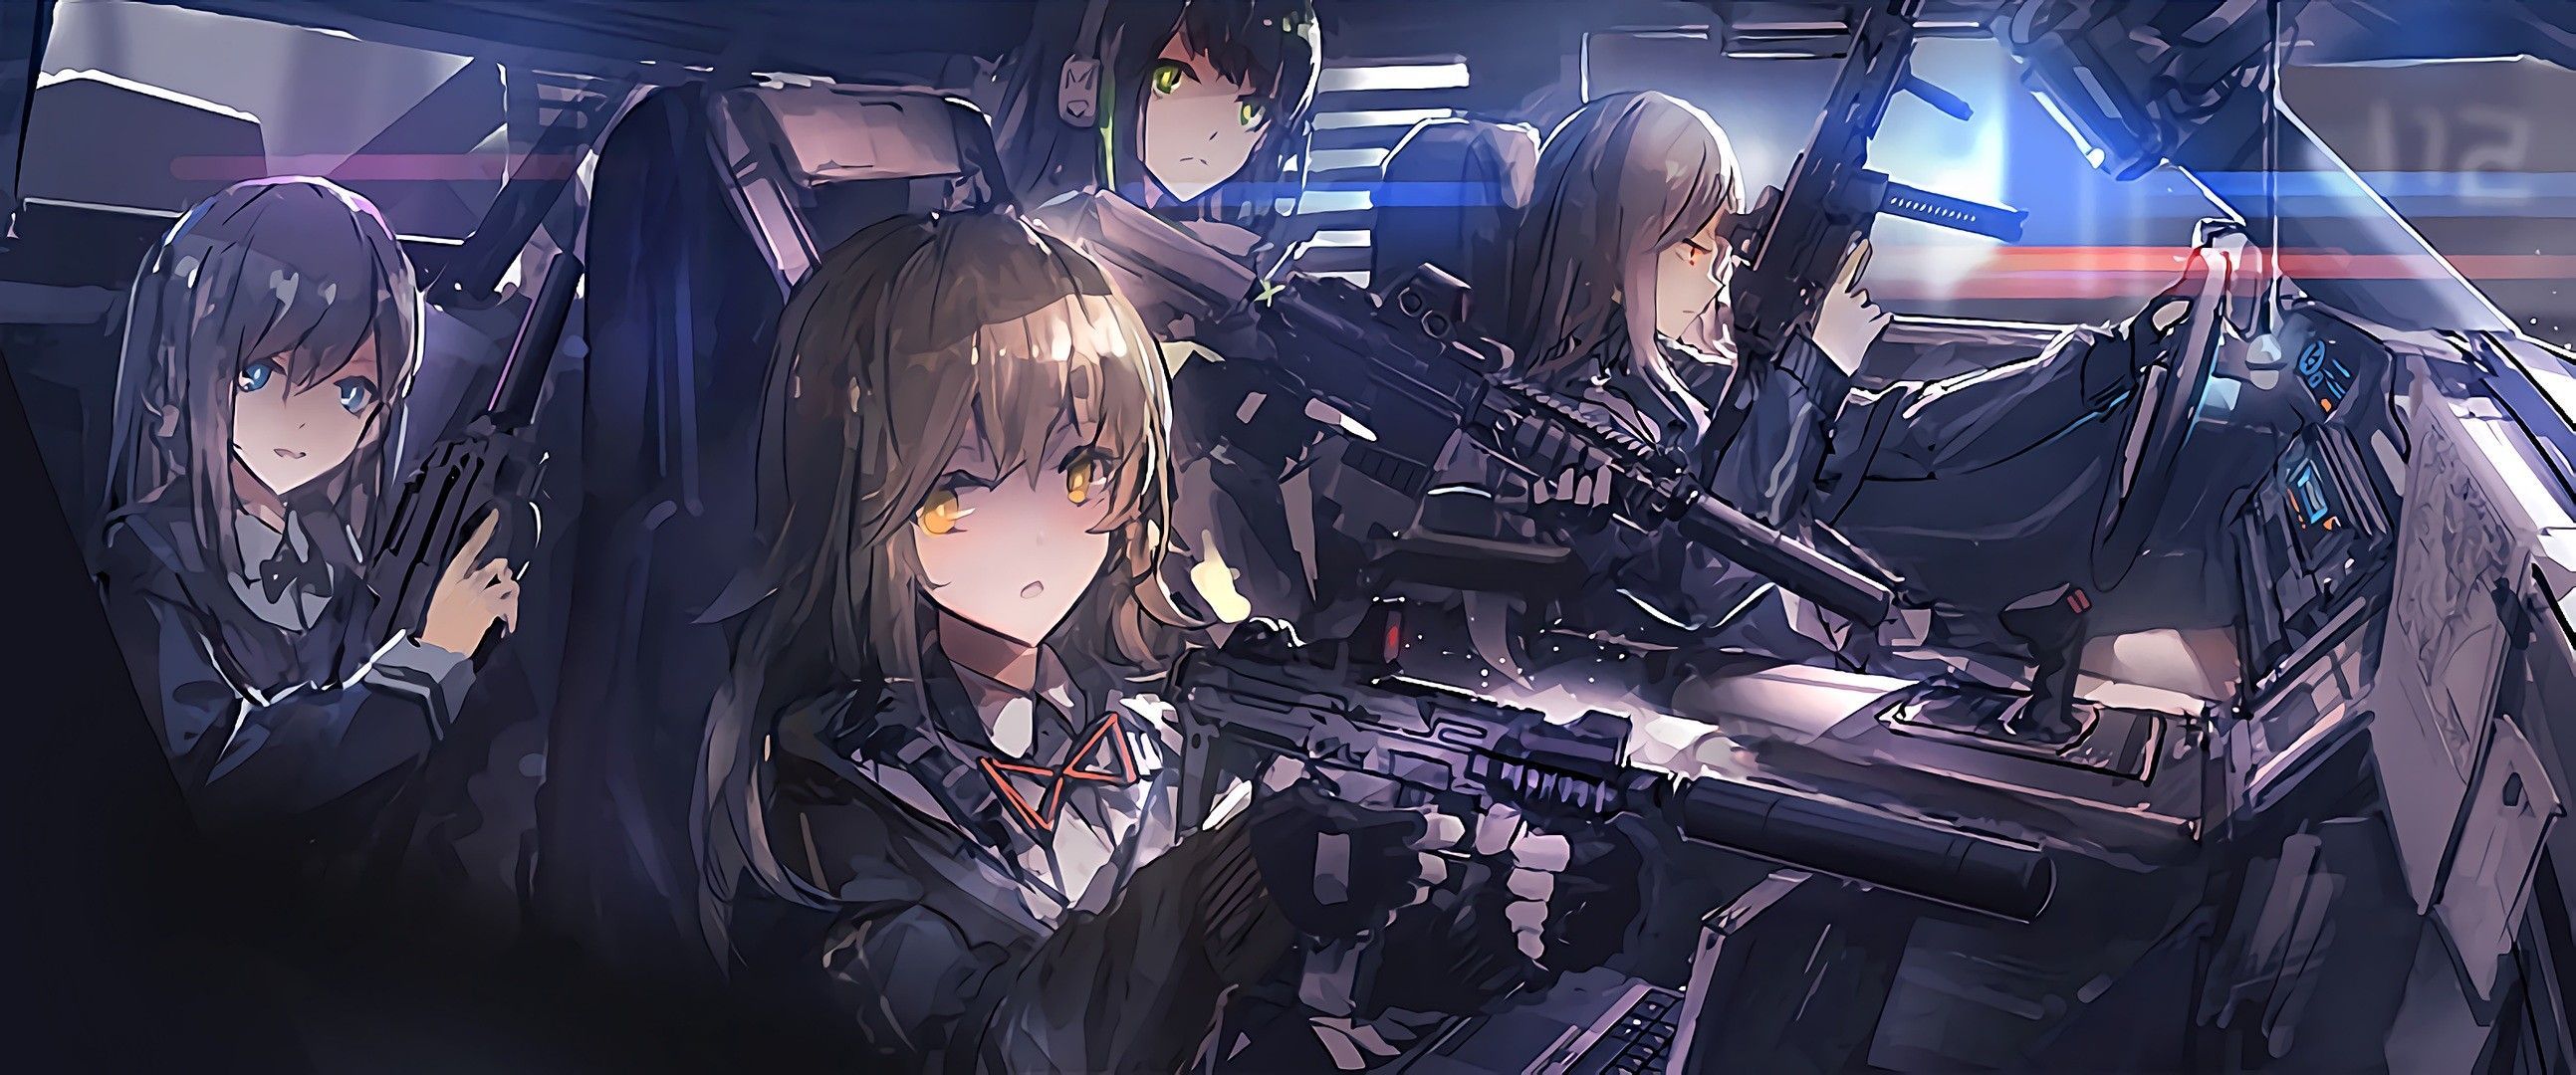 Anime Girls With Guns - Anime girl with gun wallpapers and images